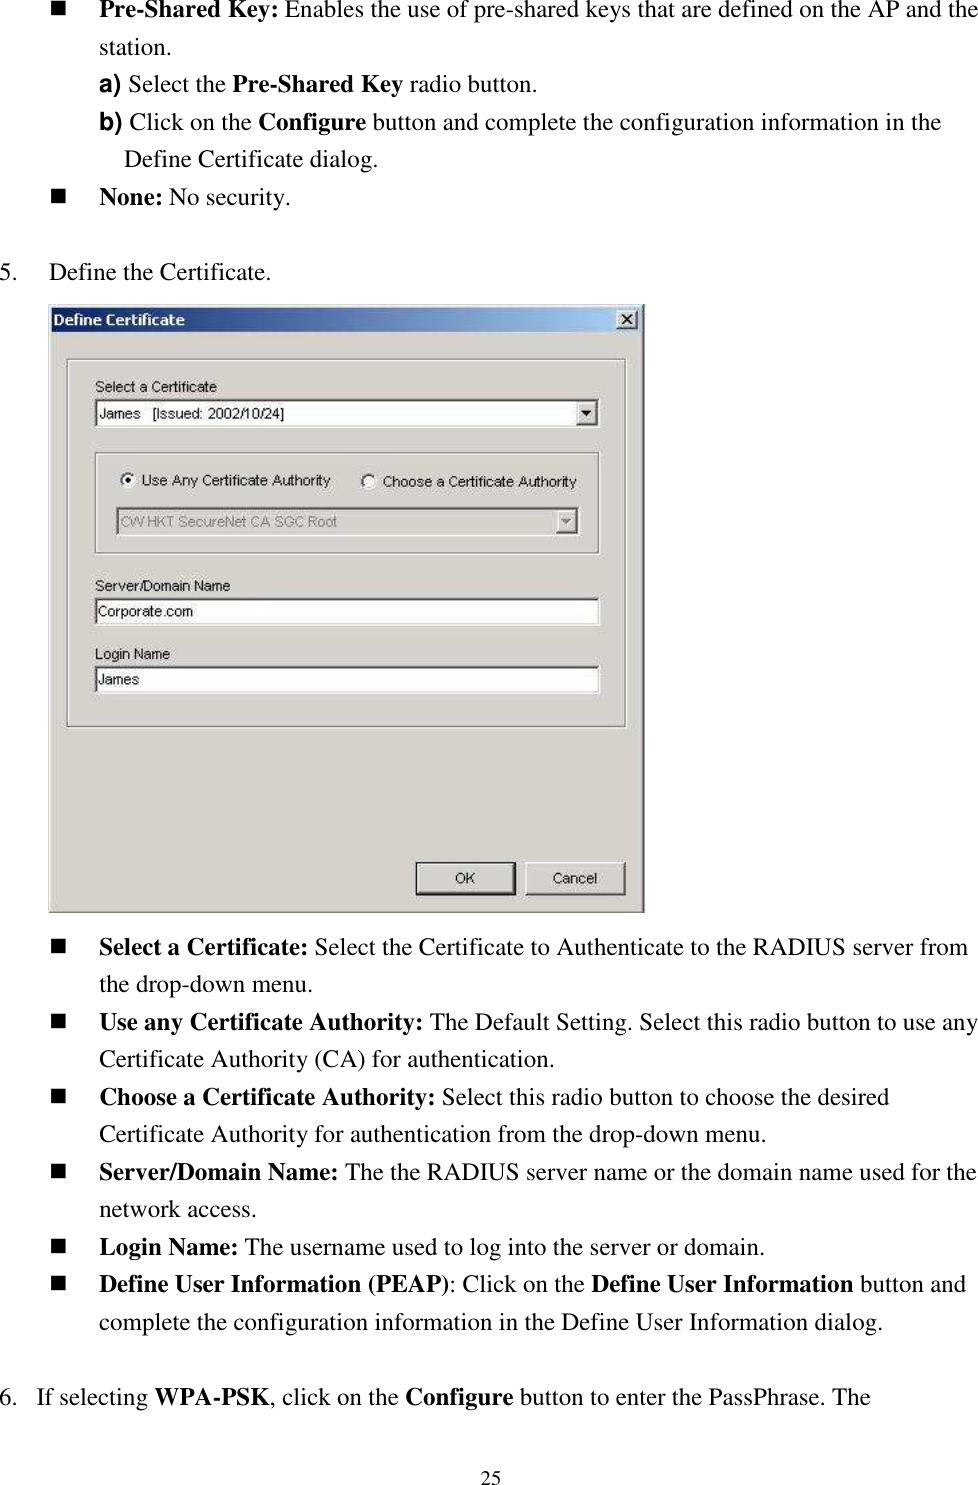   25 Pre-Shared Key: Enables the use of pre-shared keys that are defined on the AP and the station. a) Select the Pre-Shared Key radio button. b) Click on the Configure button and complete the configuration information in the Define Certificate dialog.  None: No security.  5.    Define the Certificate.        Select a Certificate: Select the Certificate to Authenticate to the RADIUS server from the drop-down menu.  Use any Certificate Authority: The Default Setting. Select this radio button to use any Certificate Authority (CA) for authentication.  Choose a Certificate Authority: Select this radio button to choose the desired Certificate Authority for authentication from the drop-down menu.  Server/Domain Name: The the RADIUS server name or the domain name used for the network access.  Login Name: The username used to log into the server or domain.  Define User Information (PEAP): Click on the Define User Information button and complete the configuration information in the Define User Information dialog.  6. If selecting WPA-PSK, click on the Configure button to enter the PassPhrase. The 